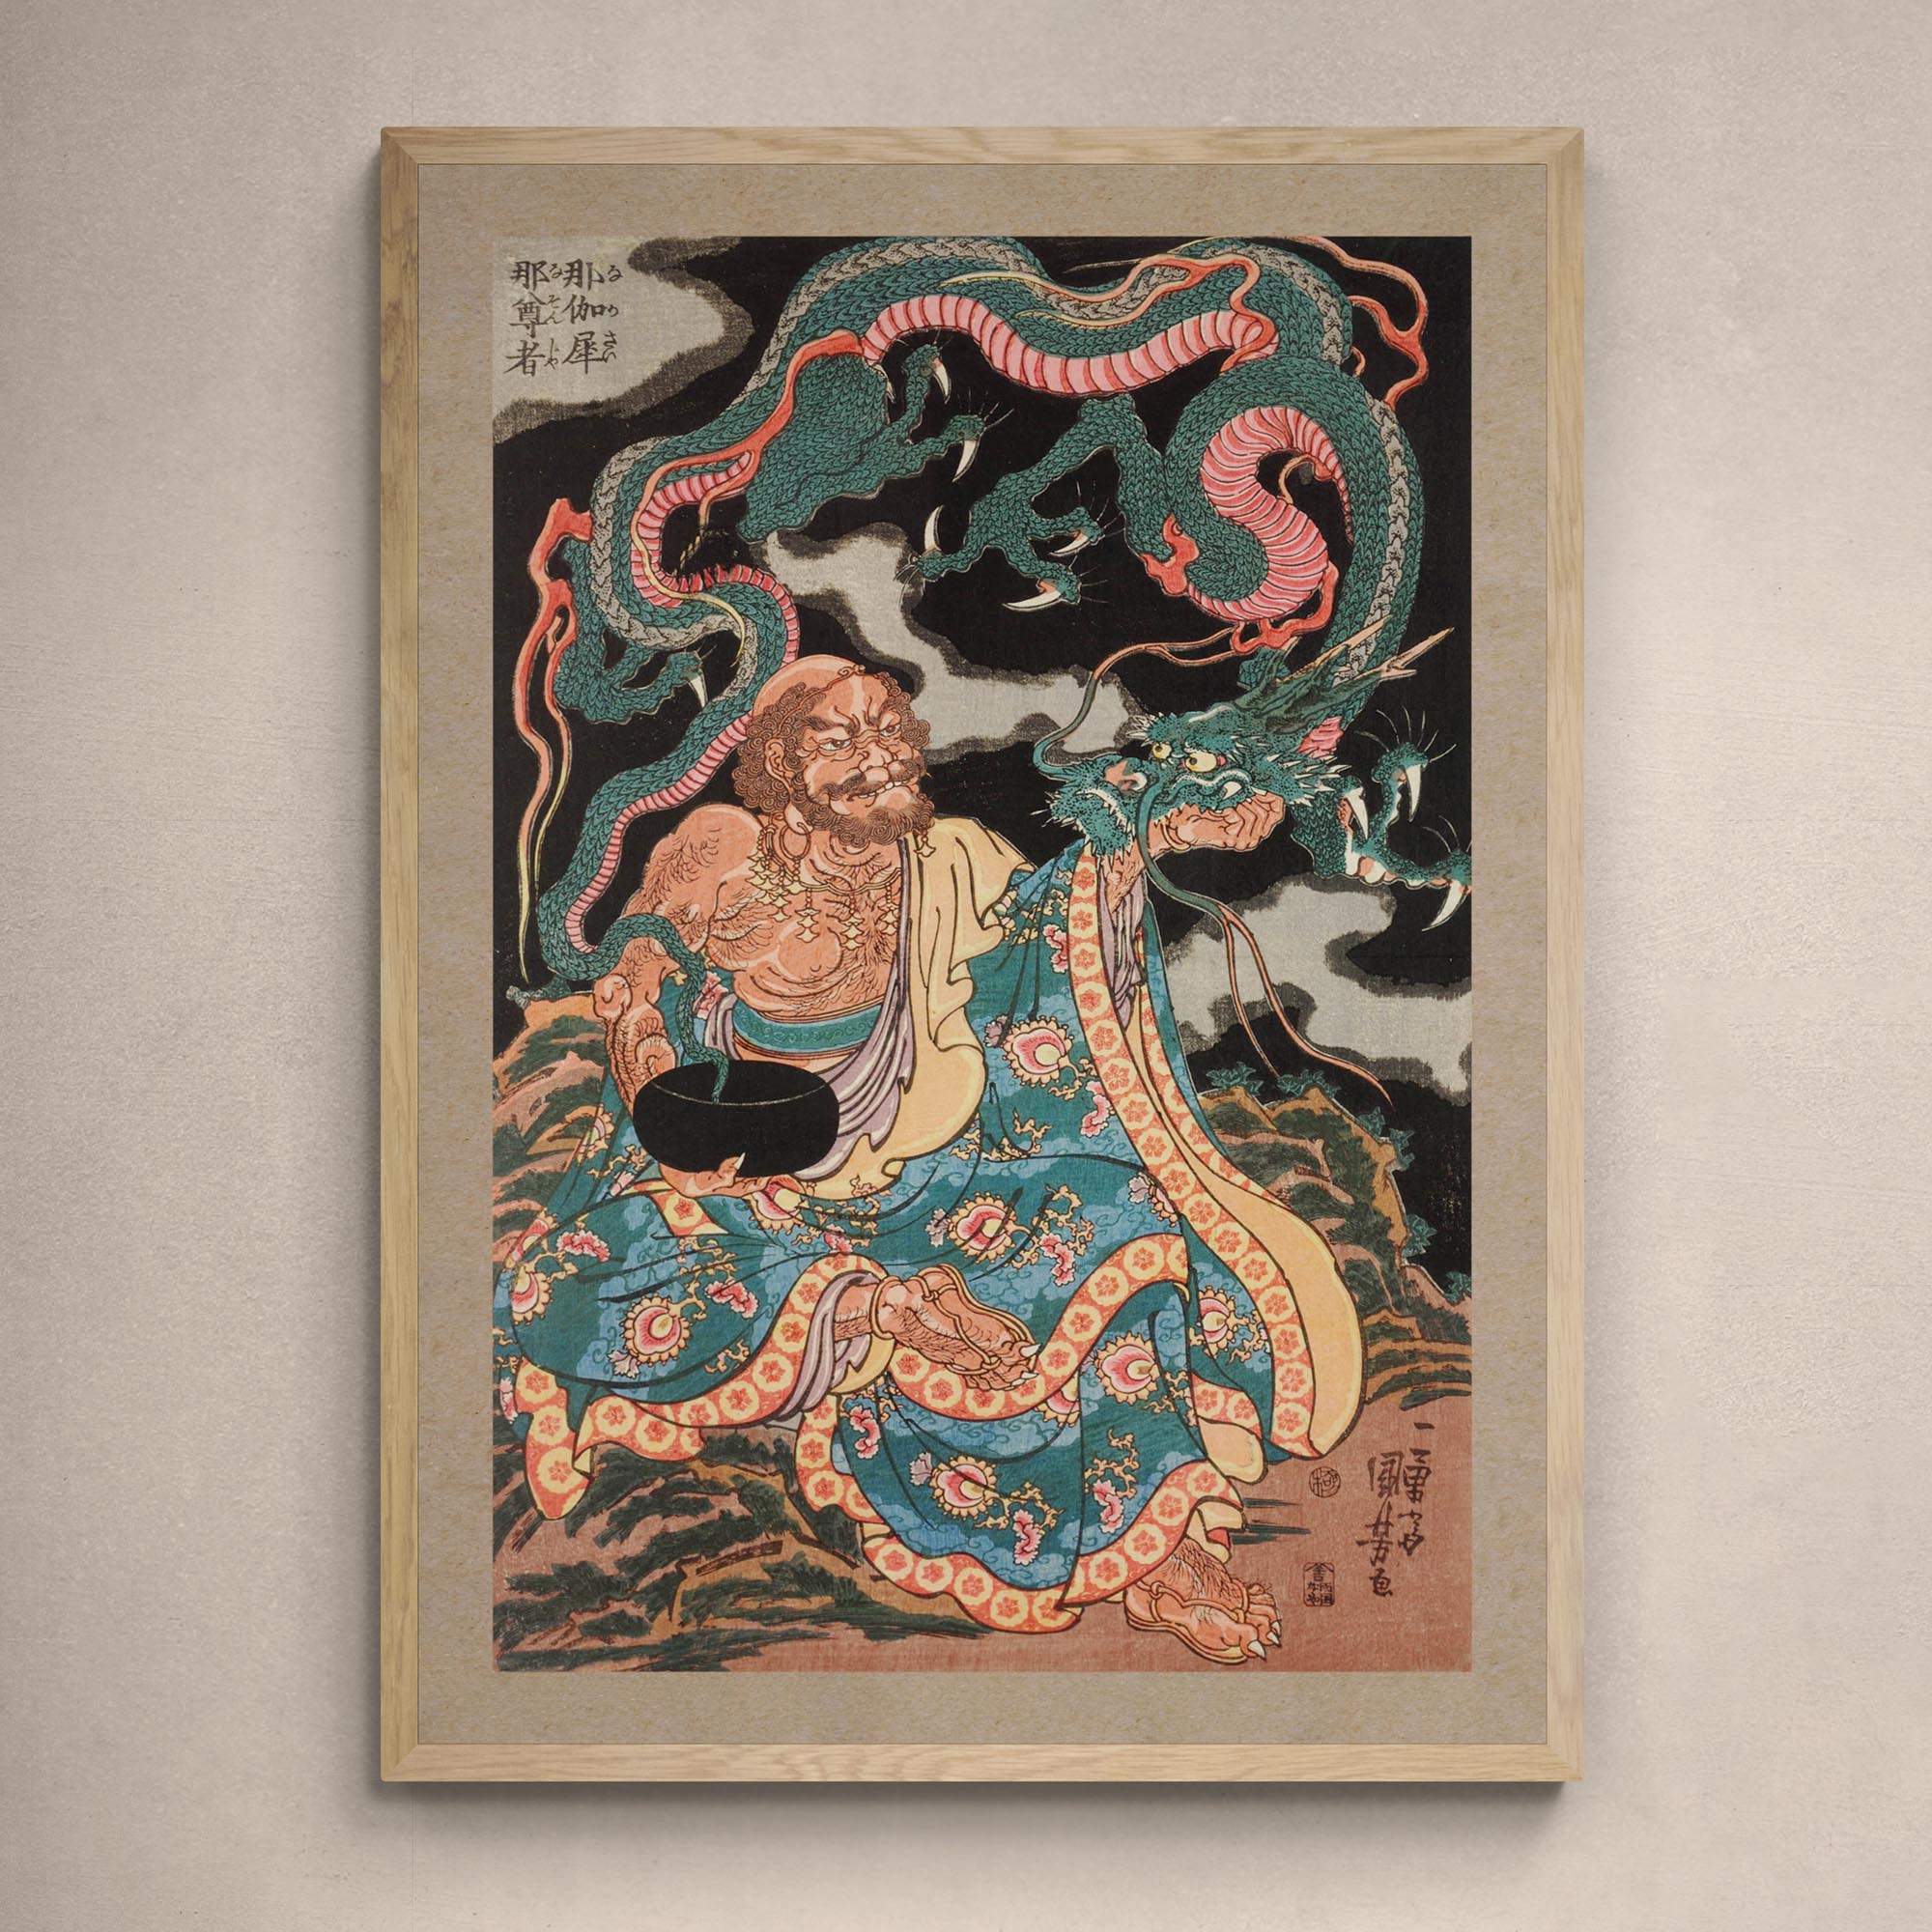 Fine art 4"x6" The Arhat Nakasaina Sonja Seated On a Rock, with Dragon Emerging From His Bowl, Vintage Buddhist Japanese Fine Art Print